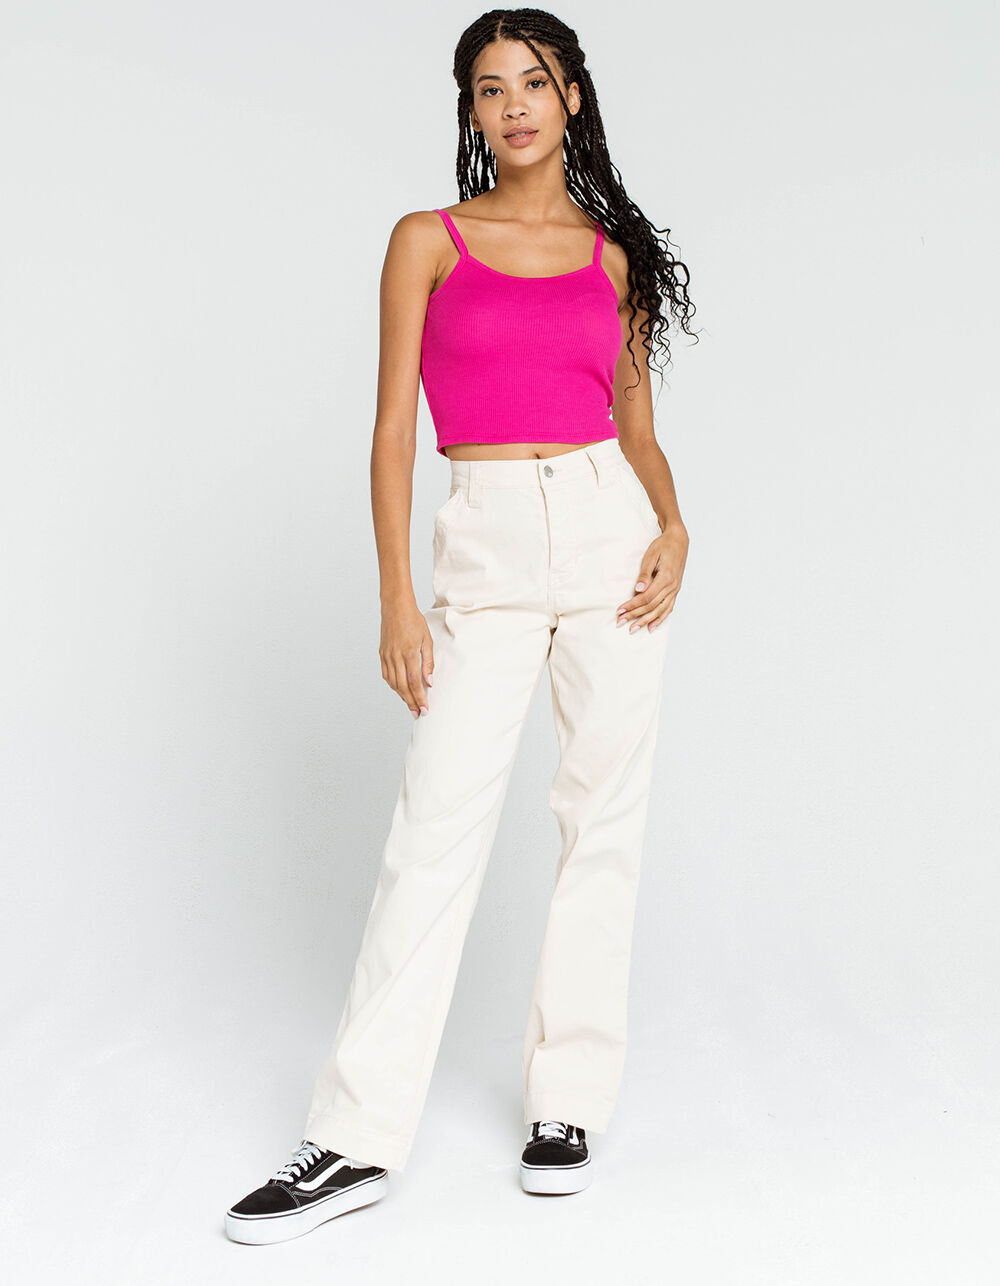 HEART & HIPS Basic Womens Berry Cropped Tank - BERRY | Tillys